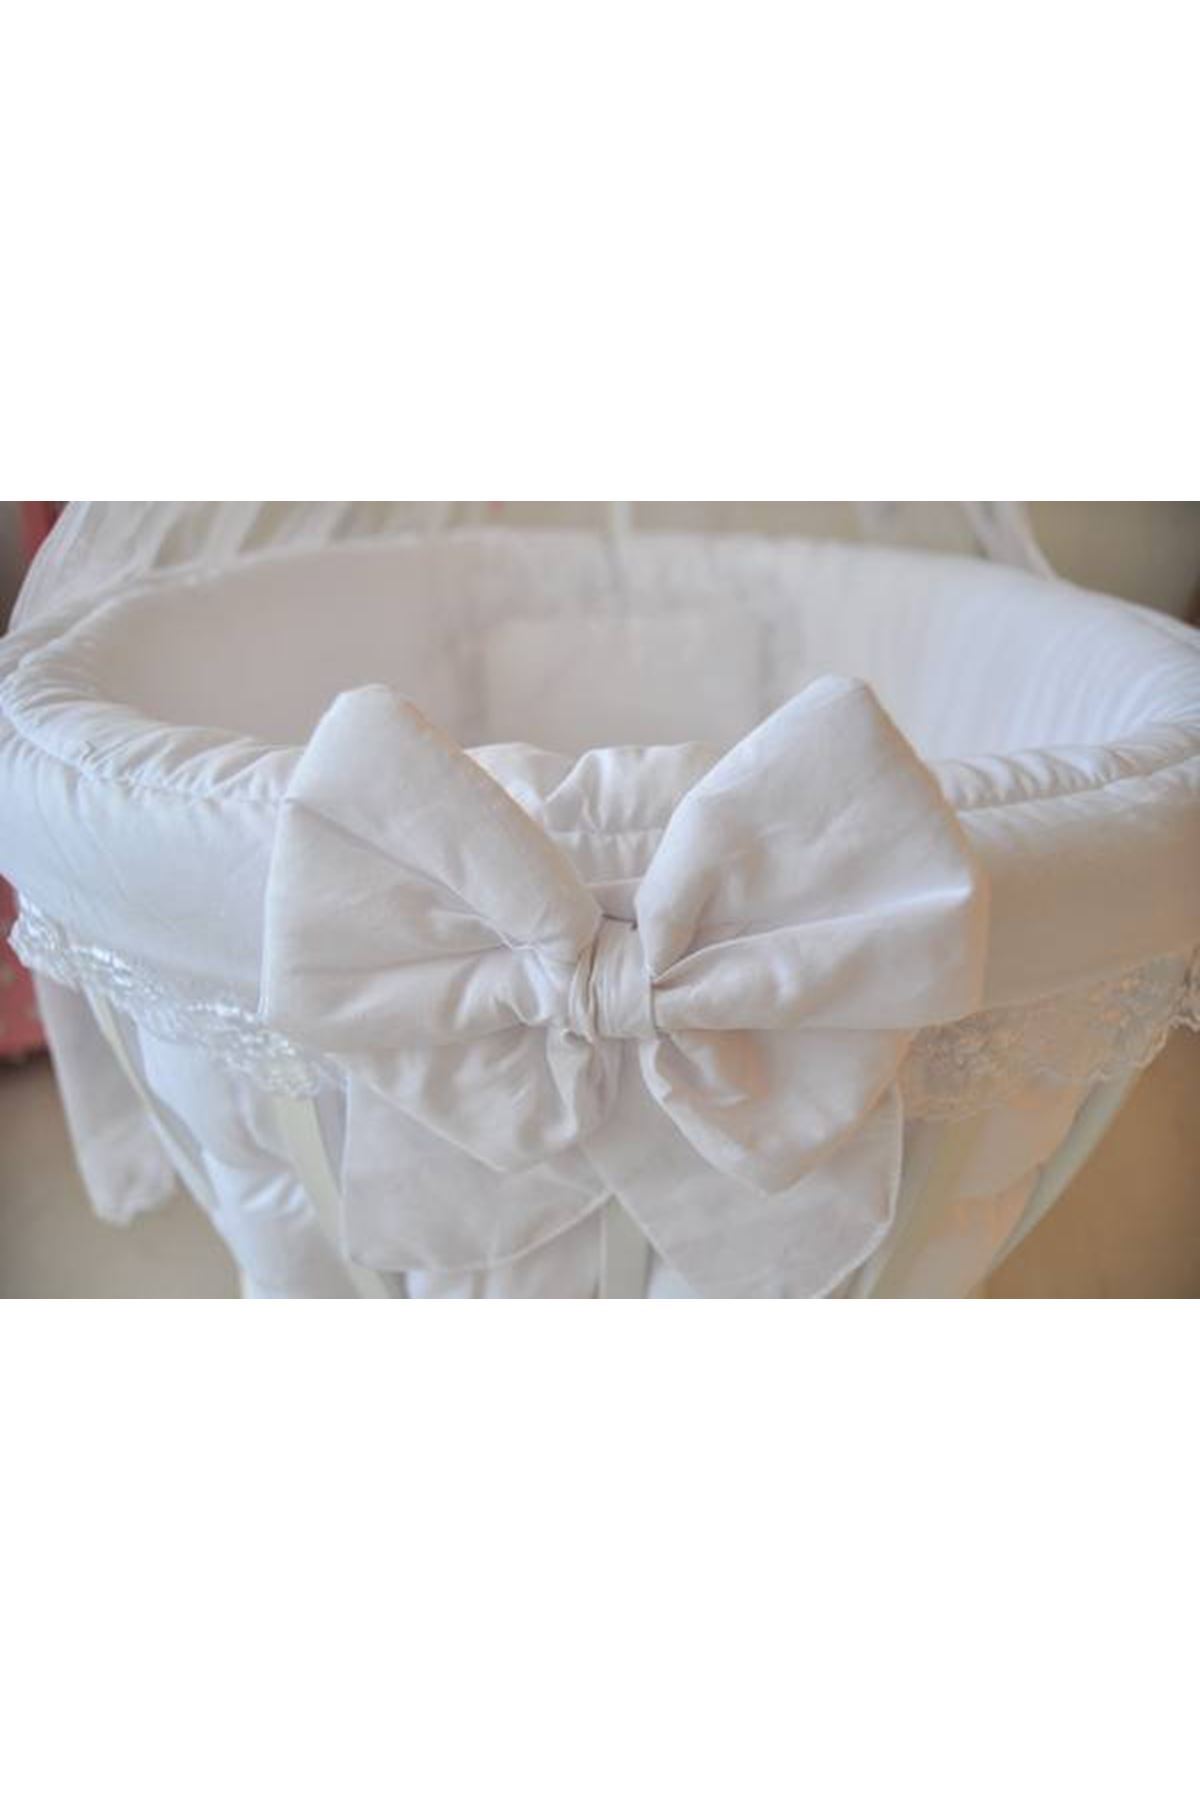 White Wooden Baby Crib with "White French Lace" Sleeping Set